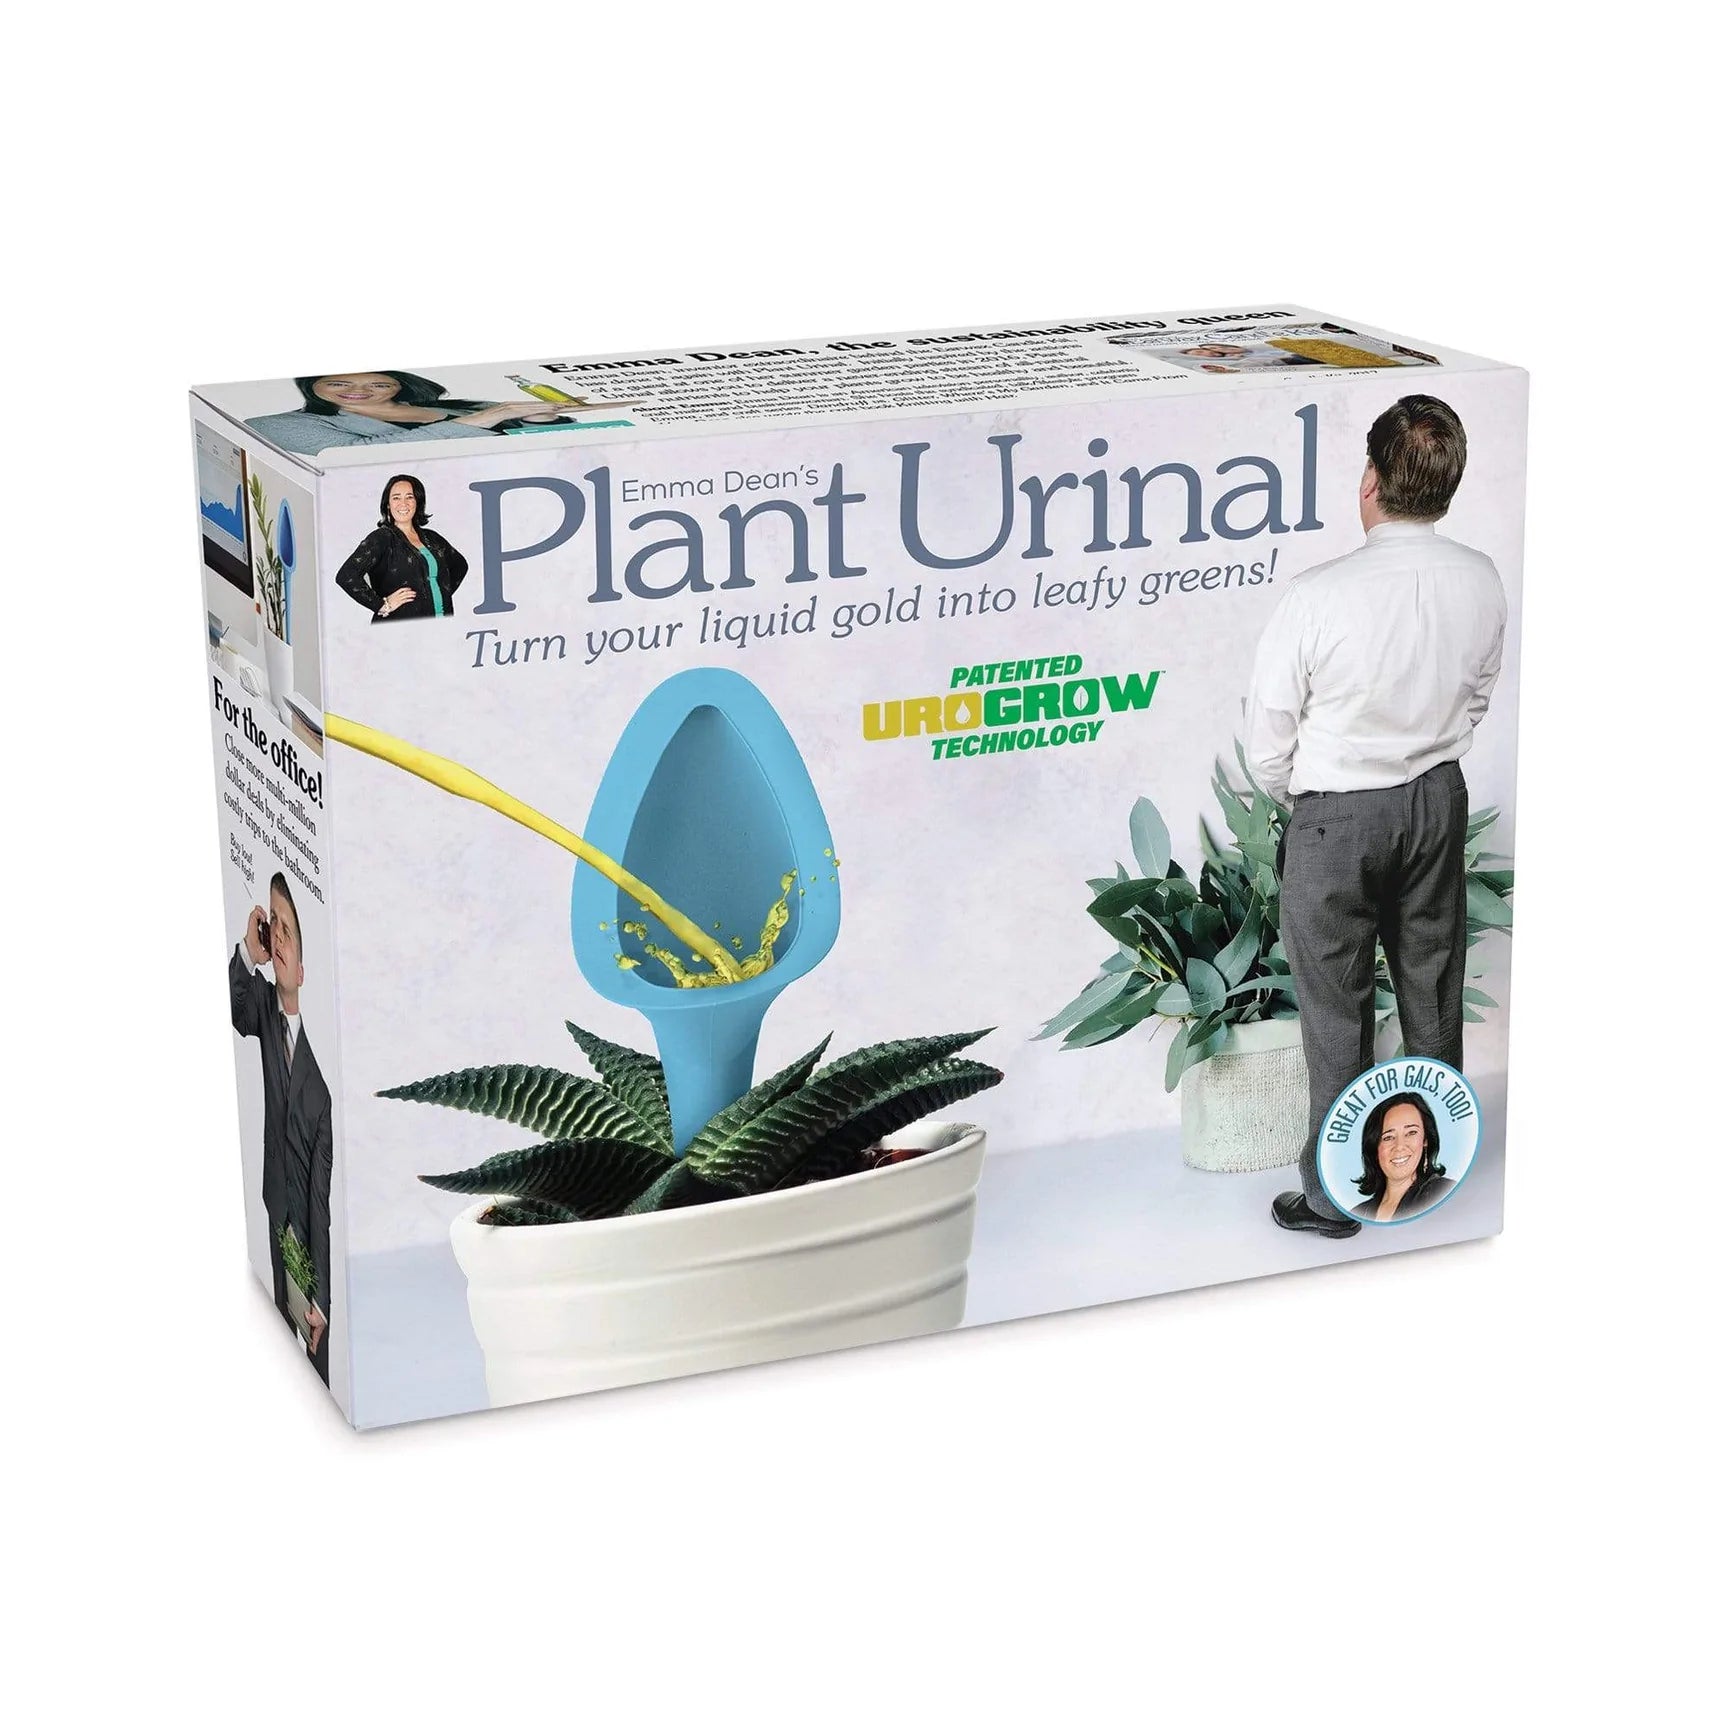 Plant Urinal Fake Product Pranks Anonymous send hilarious pranks and gag gifts to your friends or family.